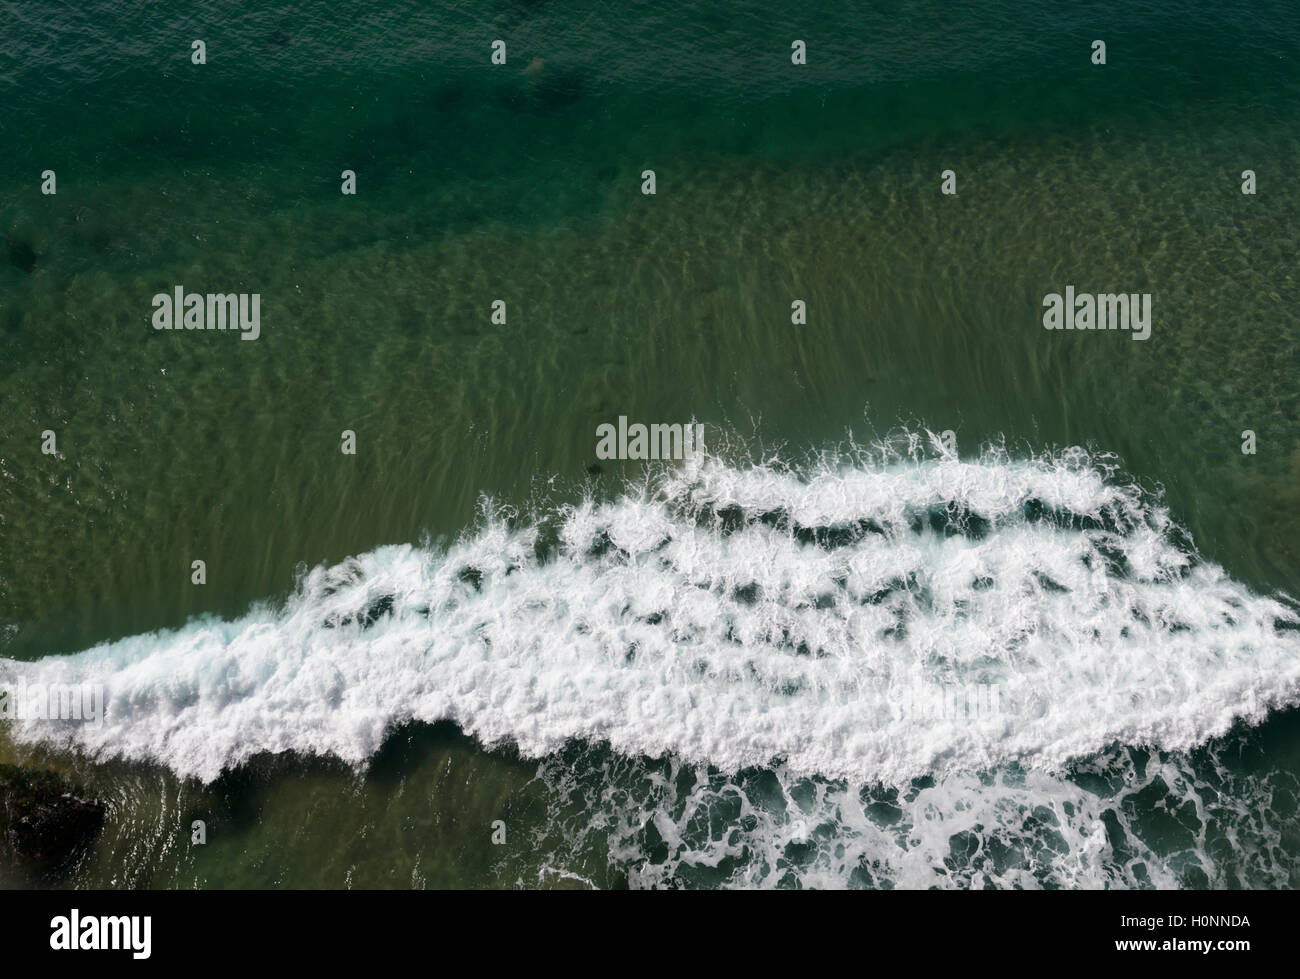 View from above of waves lapping, New South Wales, NSW, Australia Stock Photo